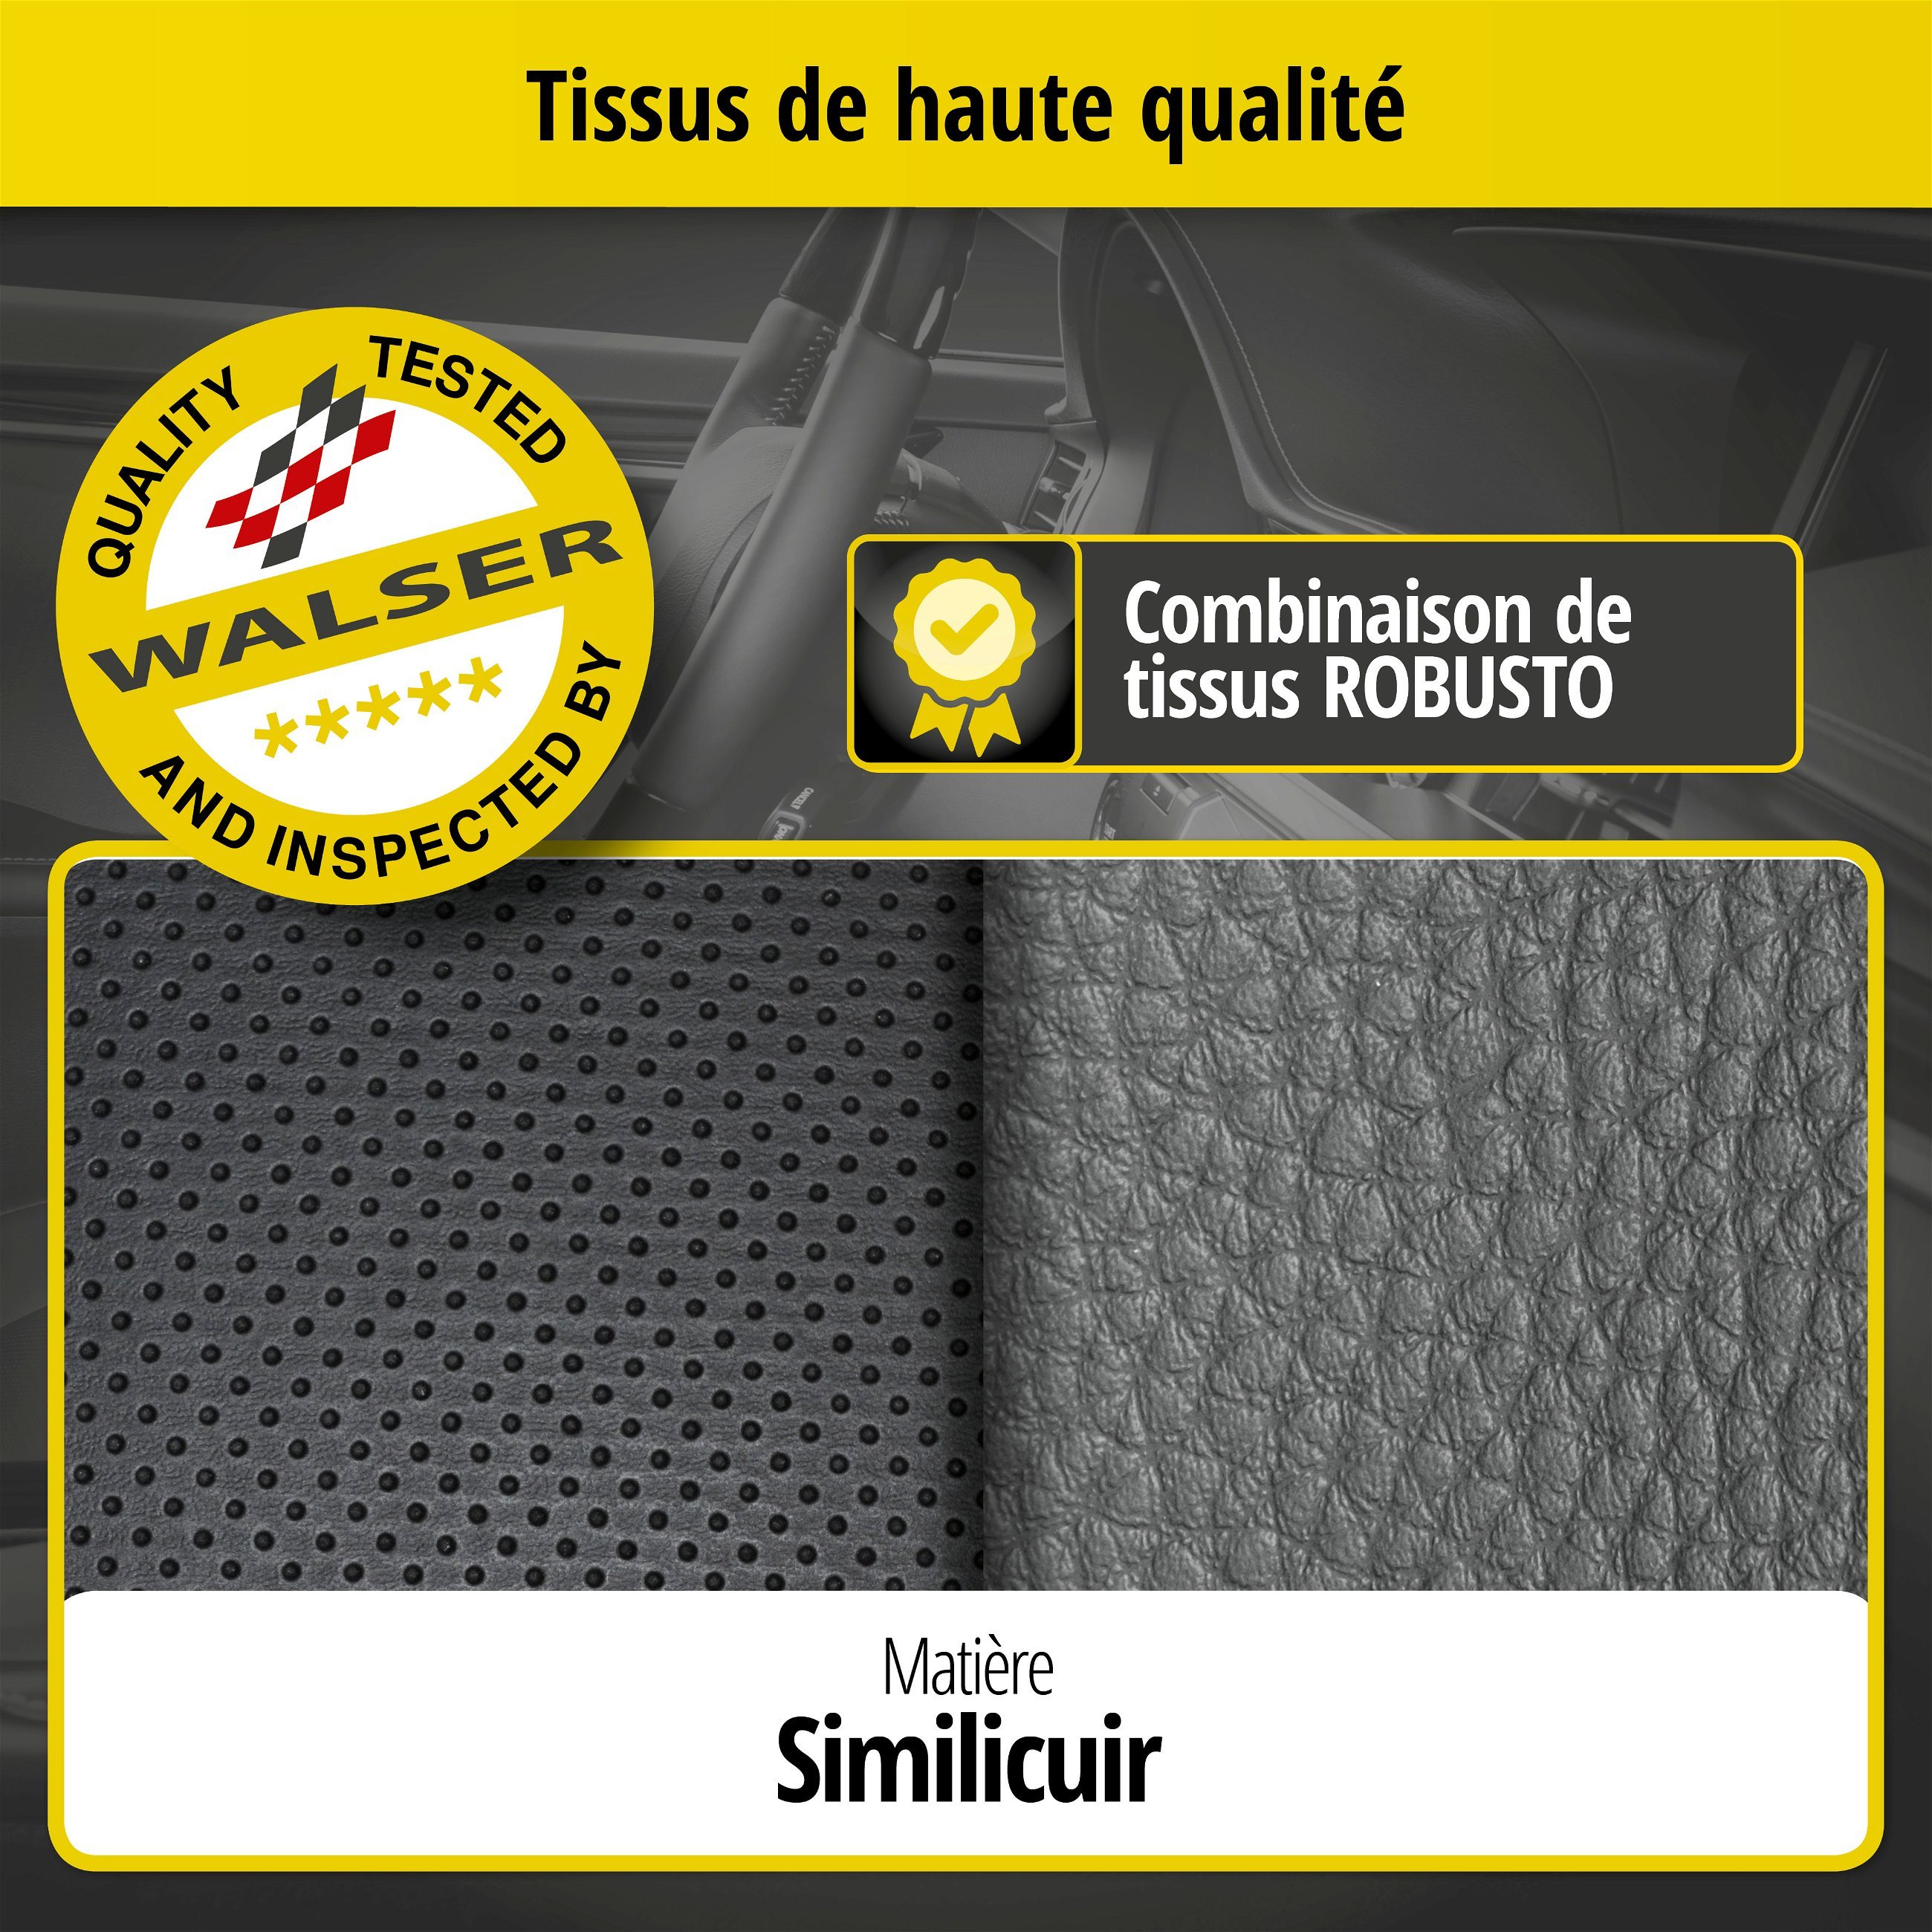 Housse de siège Robusto pour Opel Astra H 01/2004-05/2014, Astra H notchback 02/2007-05/2014, 2 housses de siège pour les sièges normaux